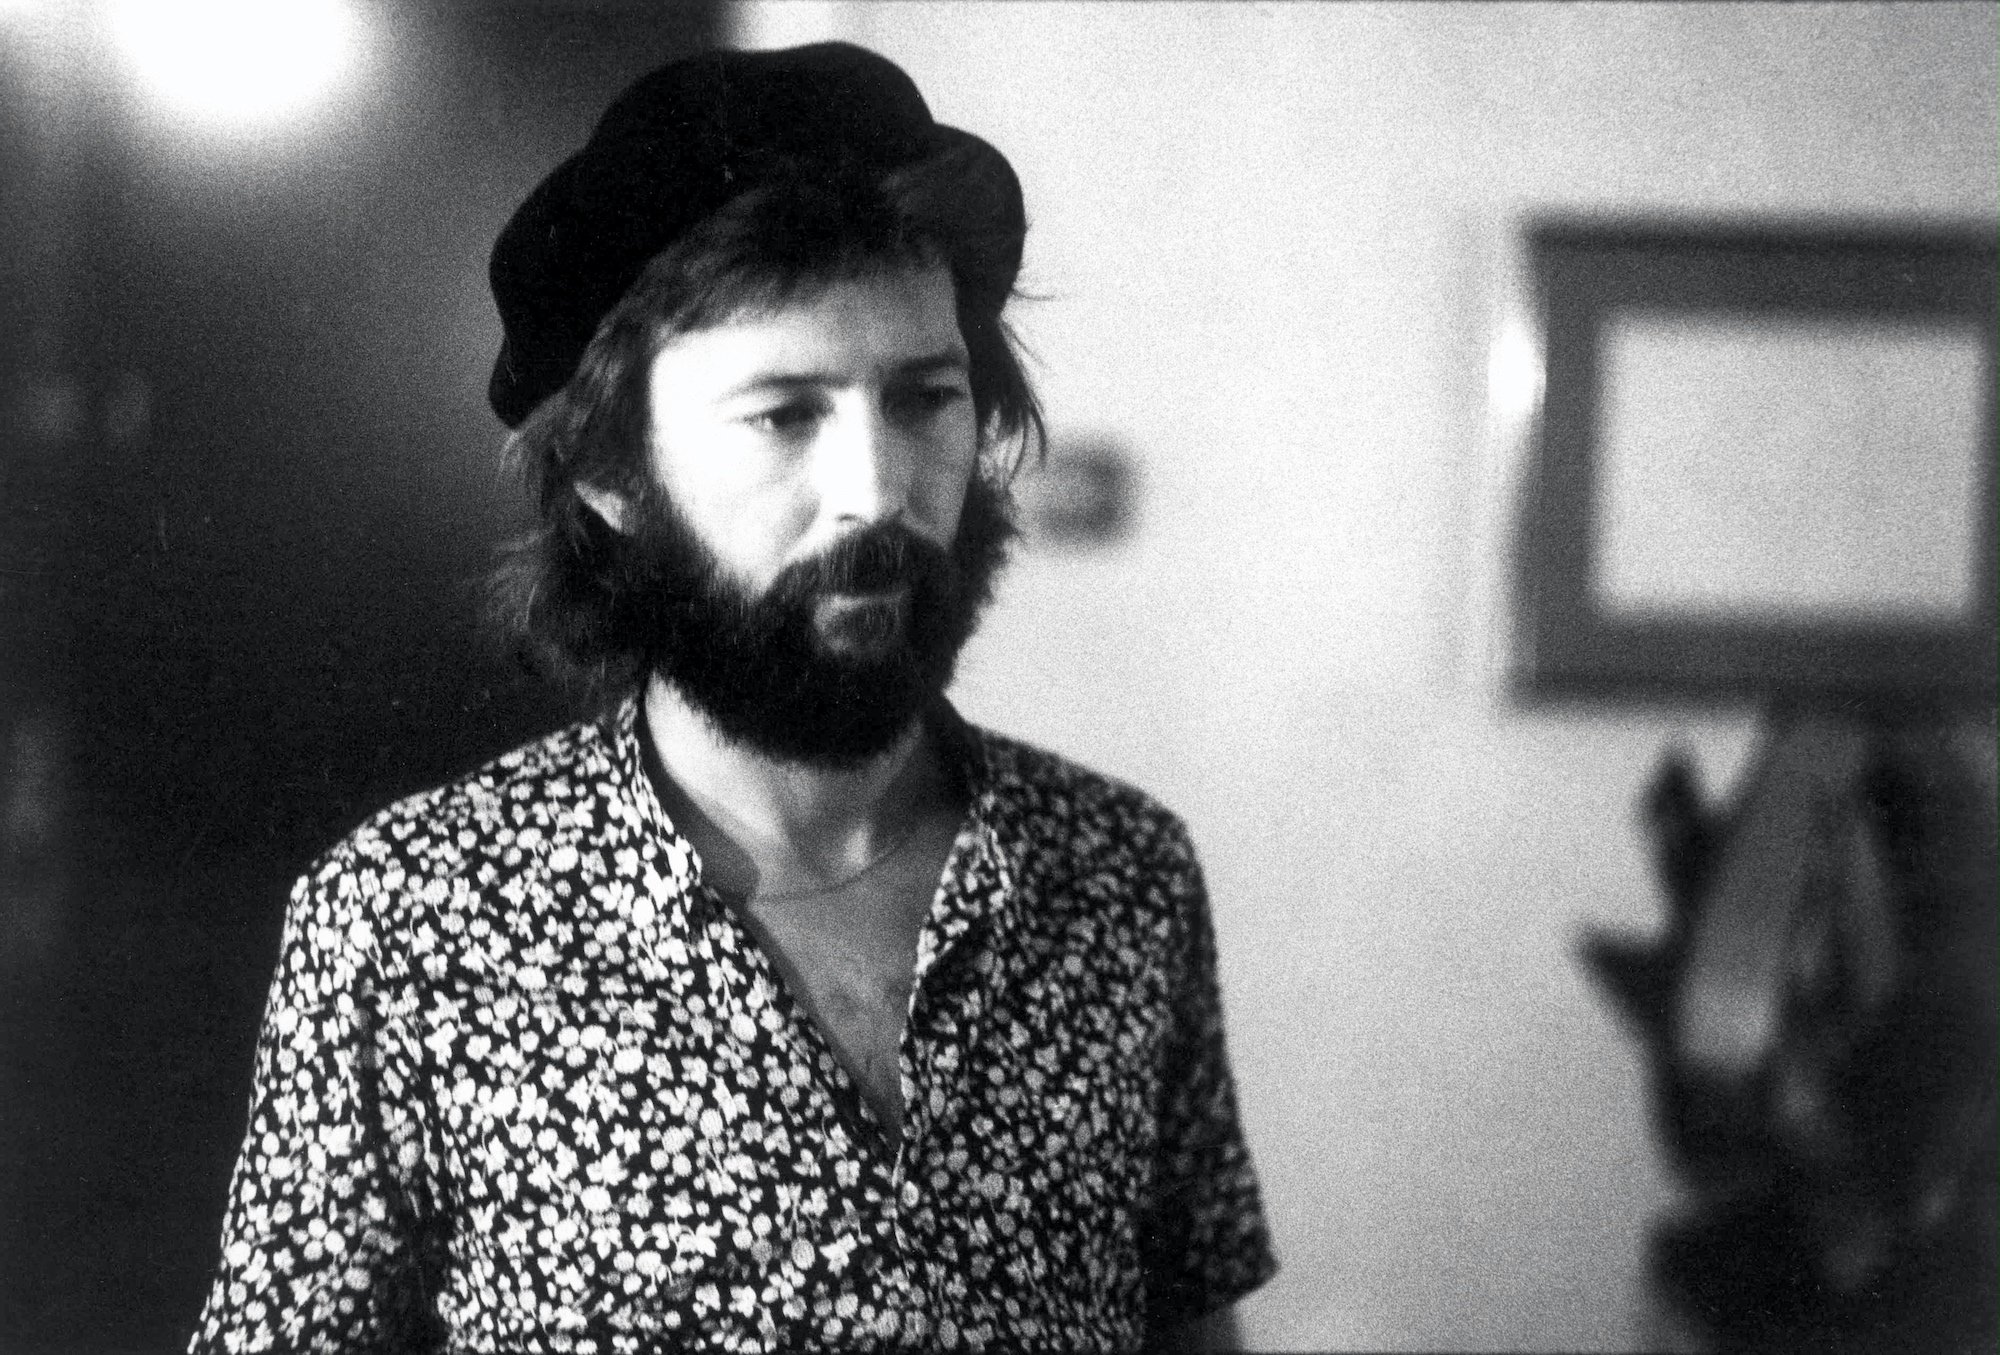 Eric Clapton looking to the right, in black and white